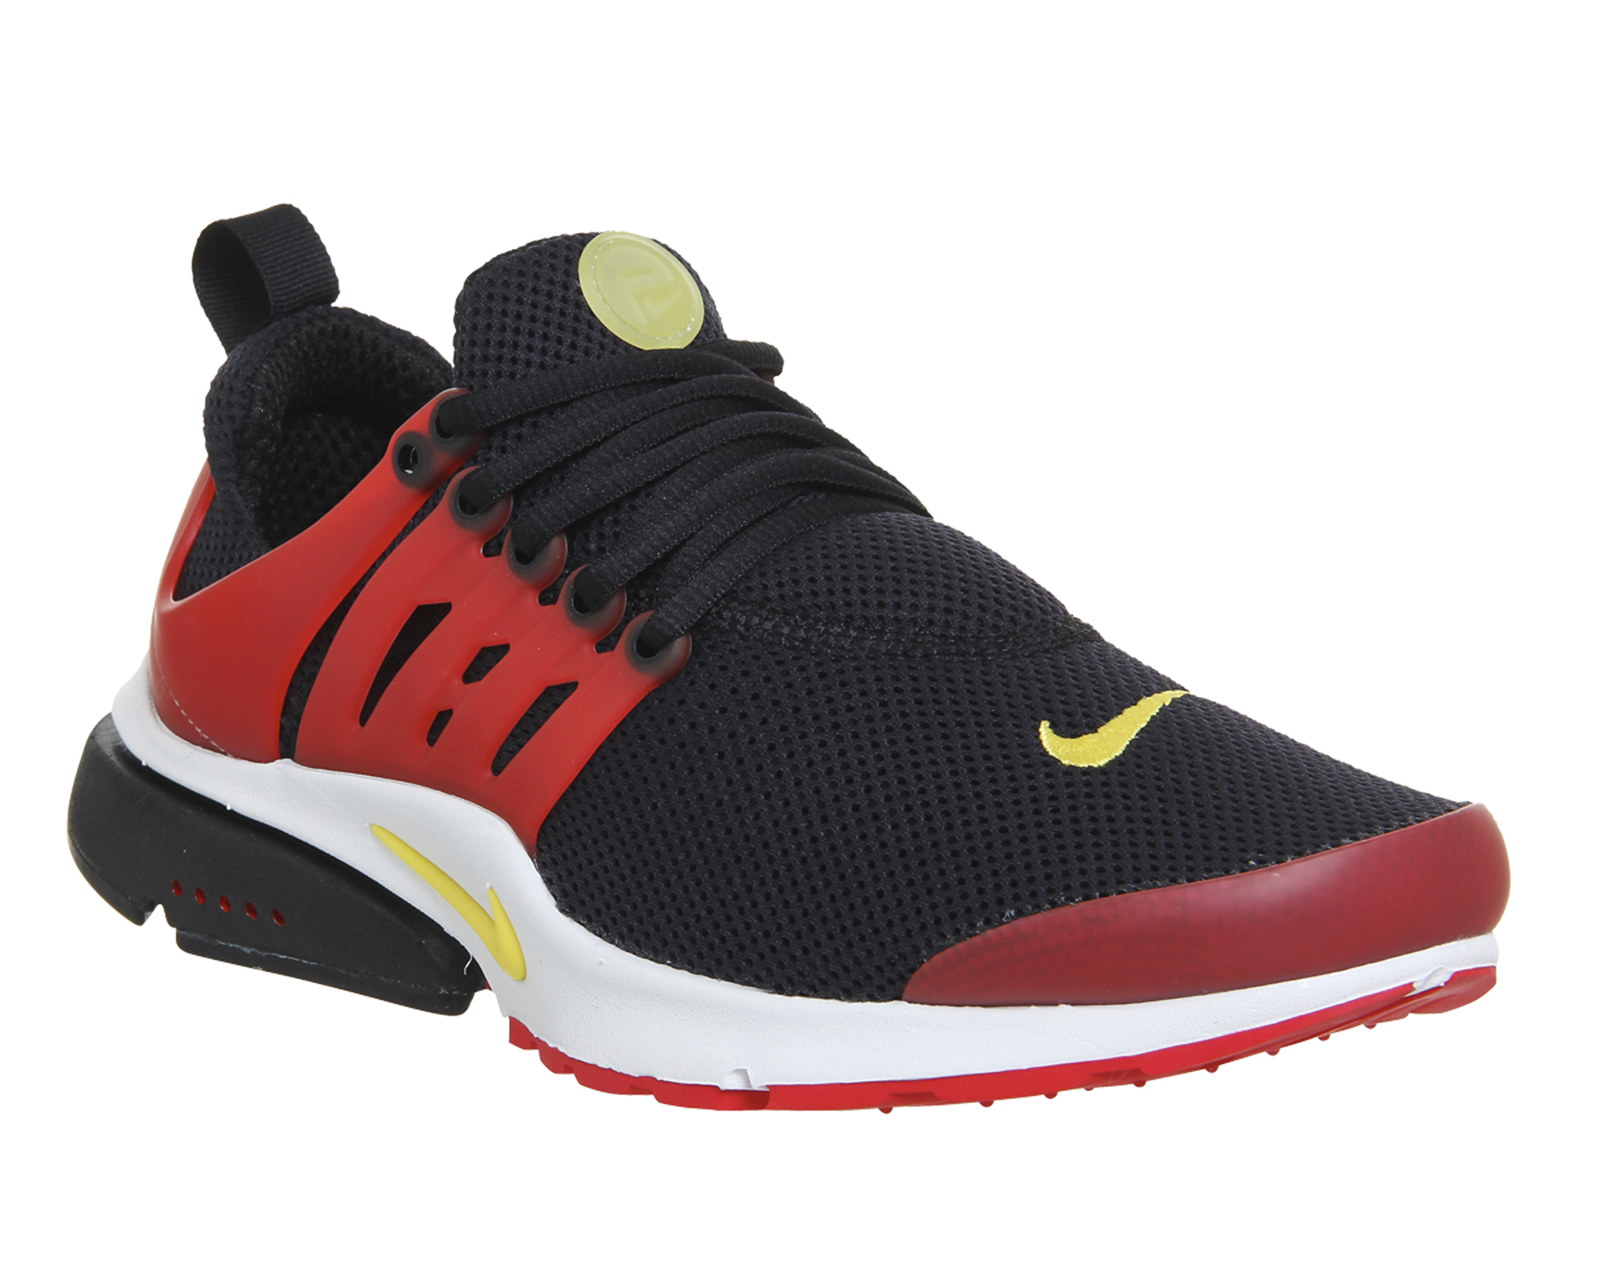 Nike Air Presto Fs Black Red Yellow - His trainers